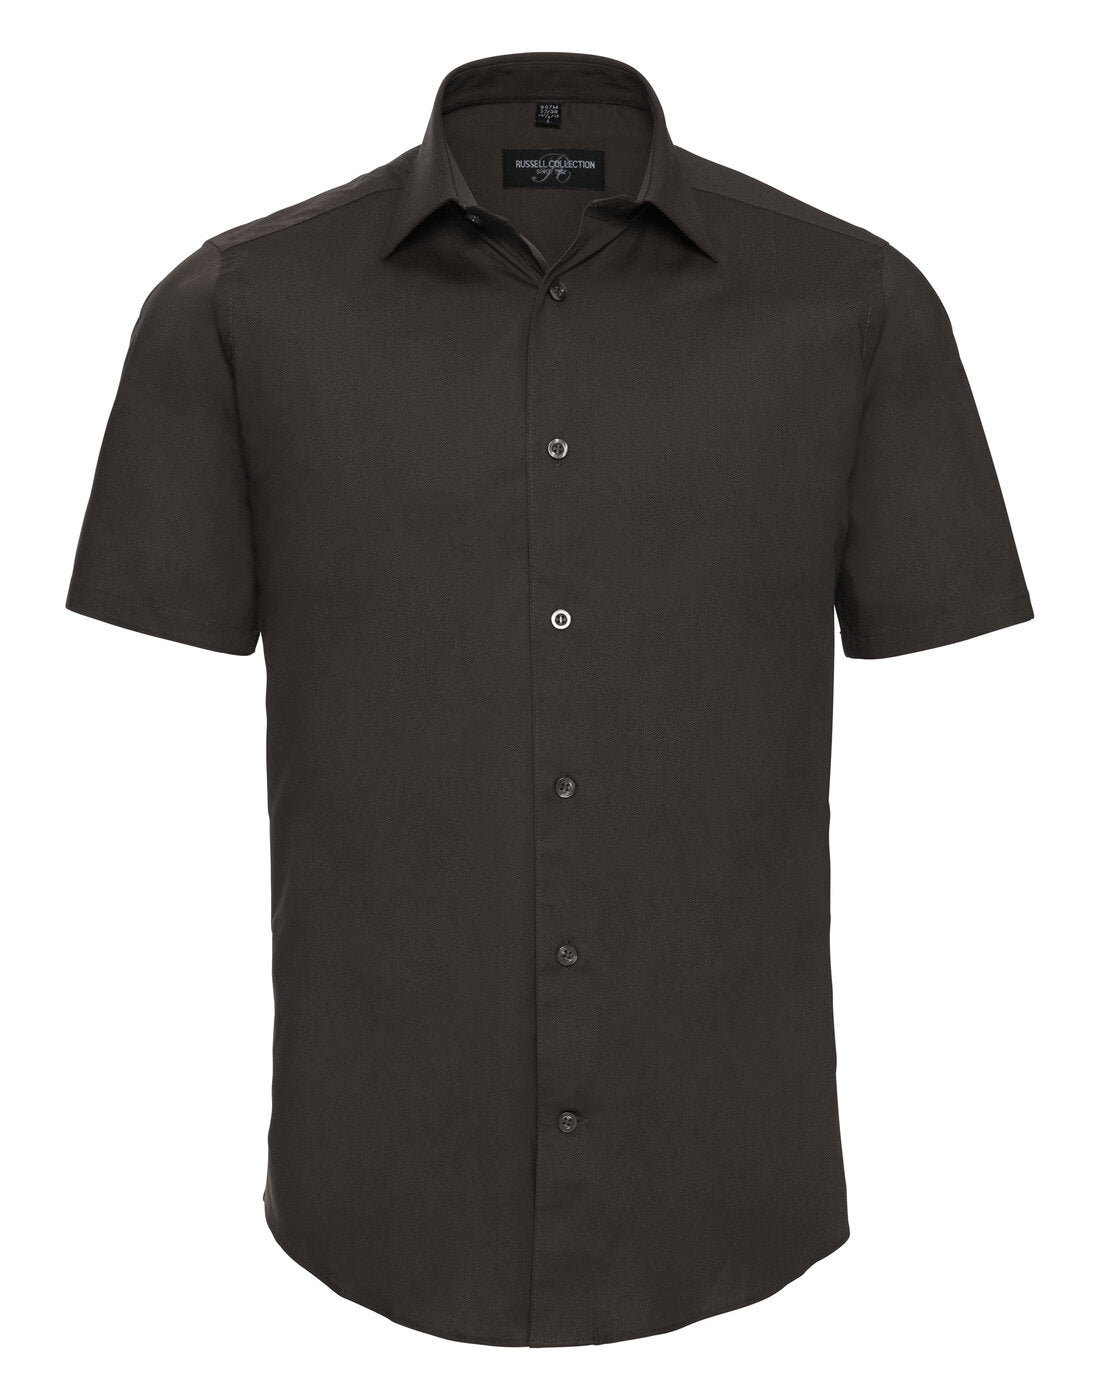 Russell Mens Short Sleeve Fitted Stretch Shirt Chocolate